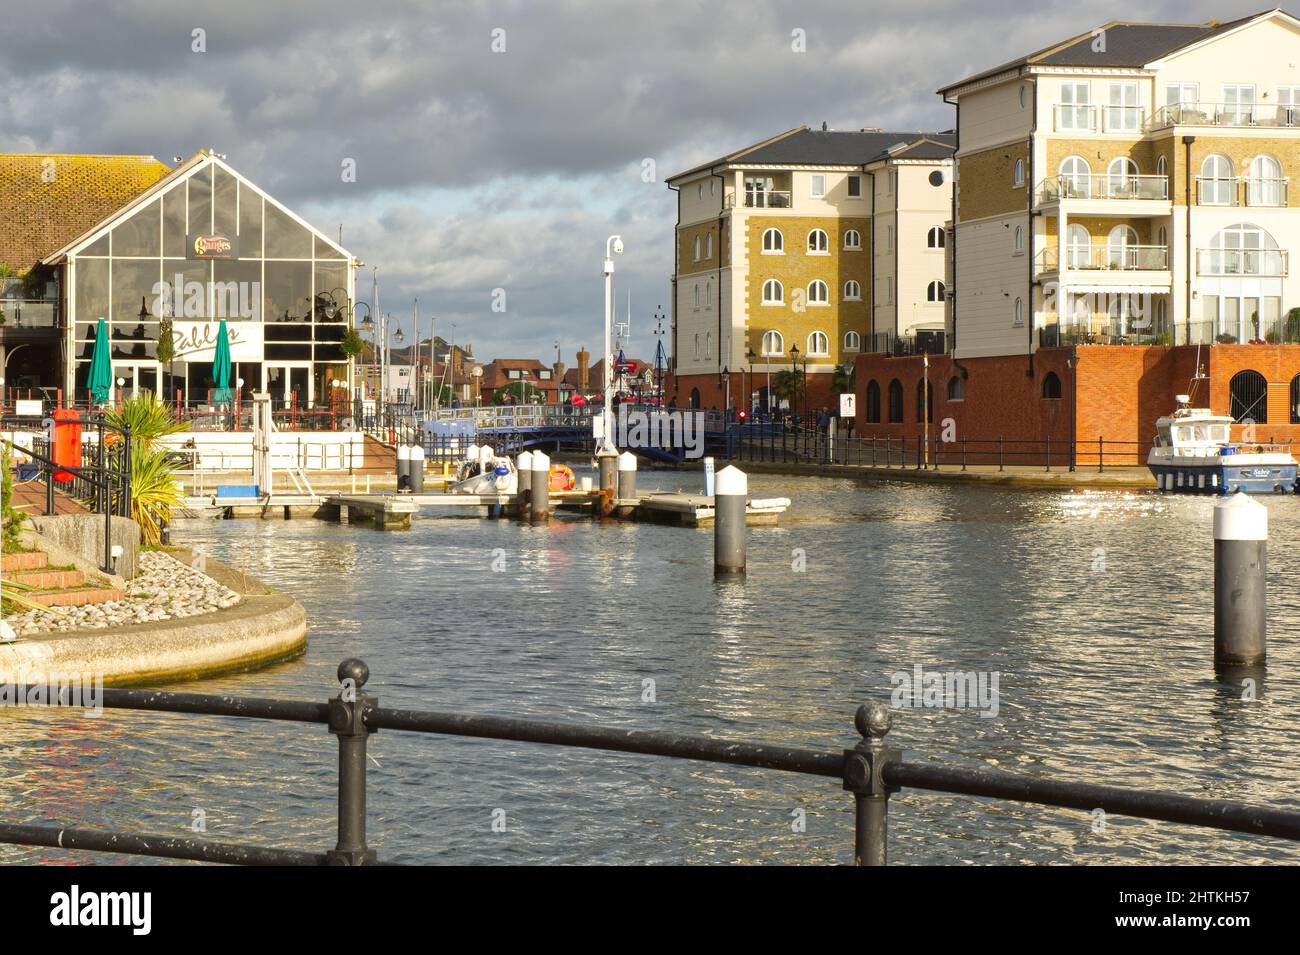 Marina, shops, restaurants and apartments at Sovereign Harbour, Eastbourne in East Sussex, England. Stock Photo